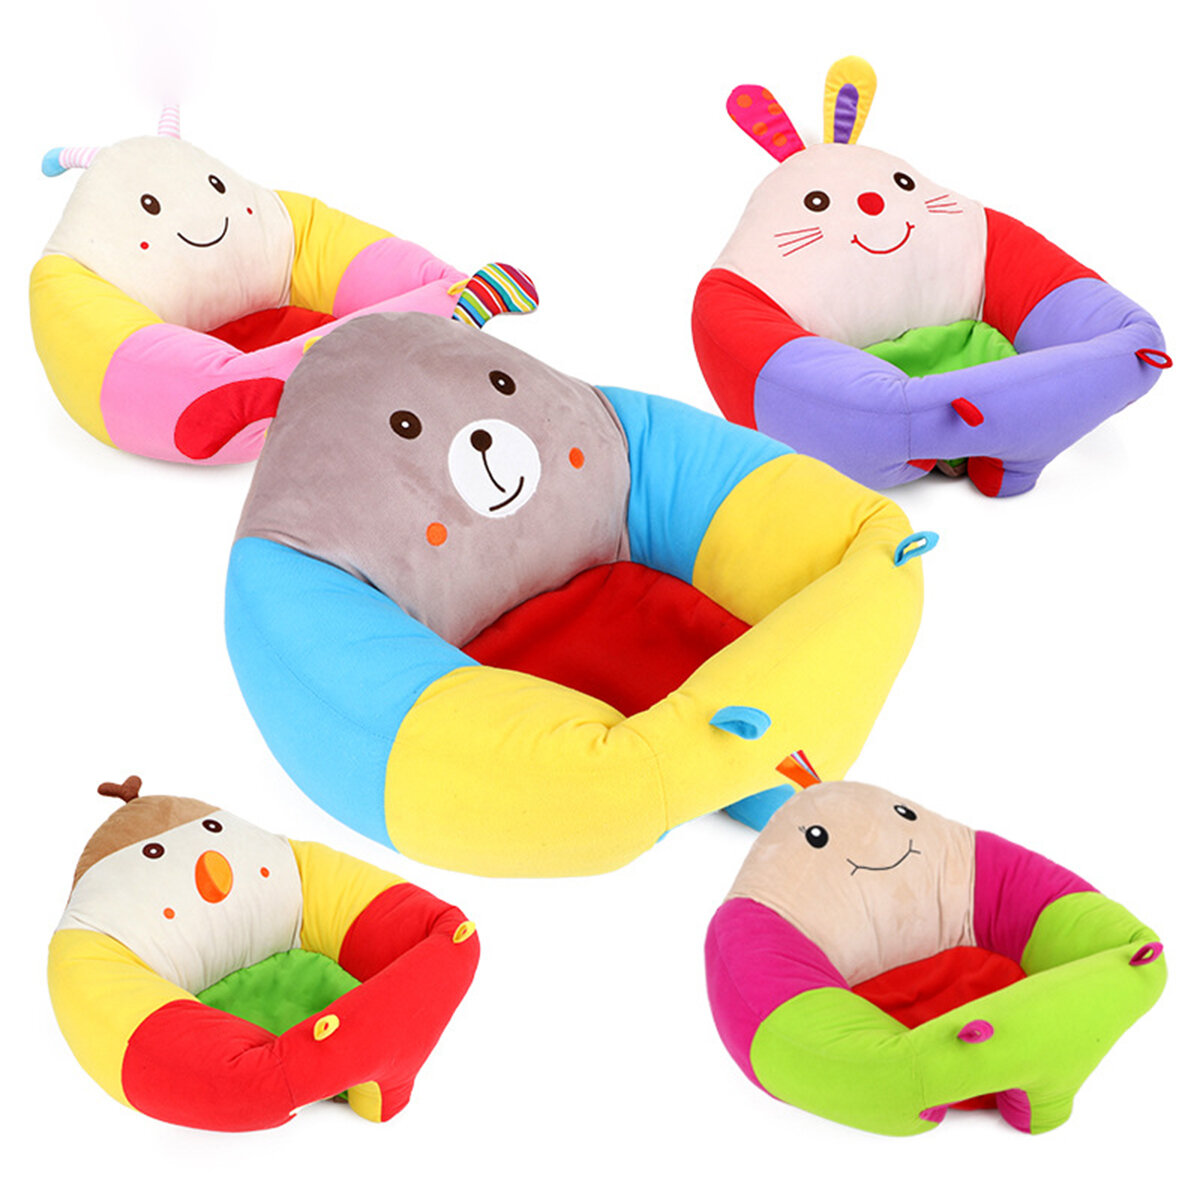 Image of Infant Baby Sitting Chair Soft Cartoon Chair Pillow Cushion Sofa Plush Learning Chair Holder Plush Toys for Childrens